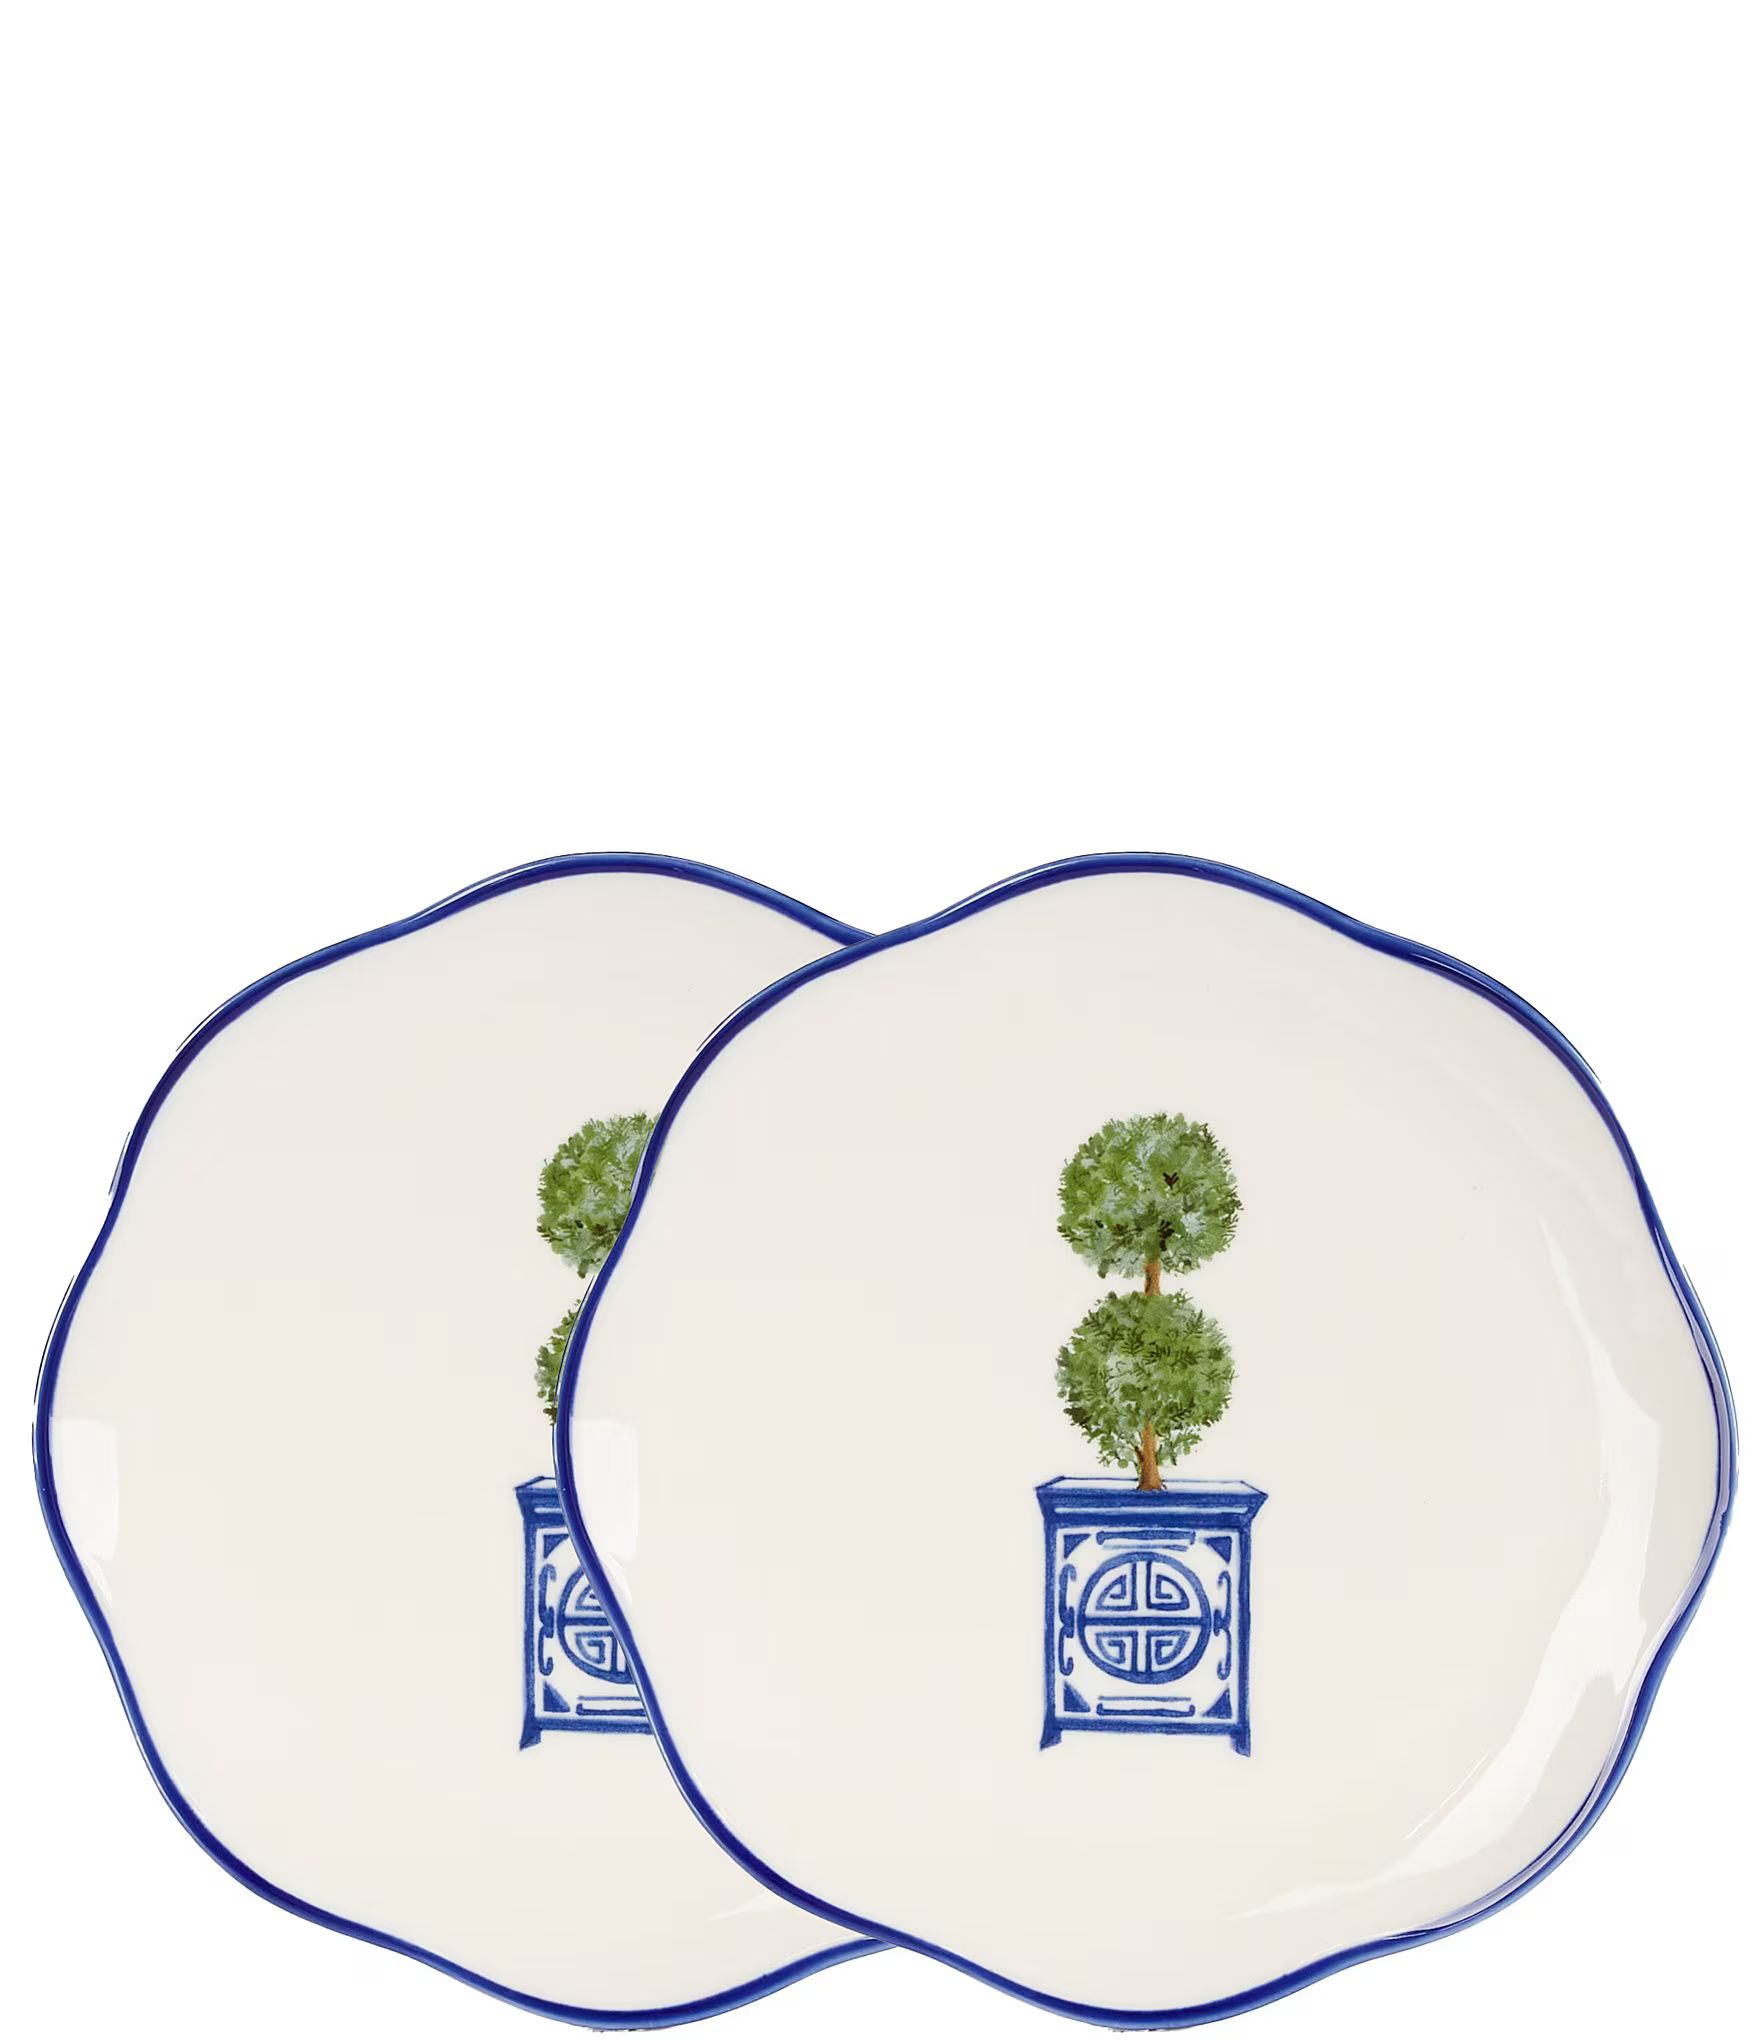 Topiary Accent Plates, Set of 2 | Dillard's